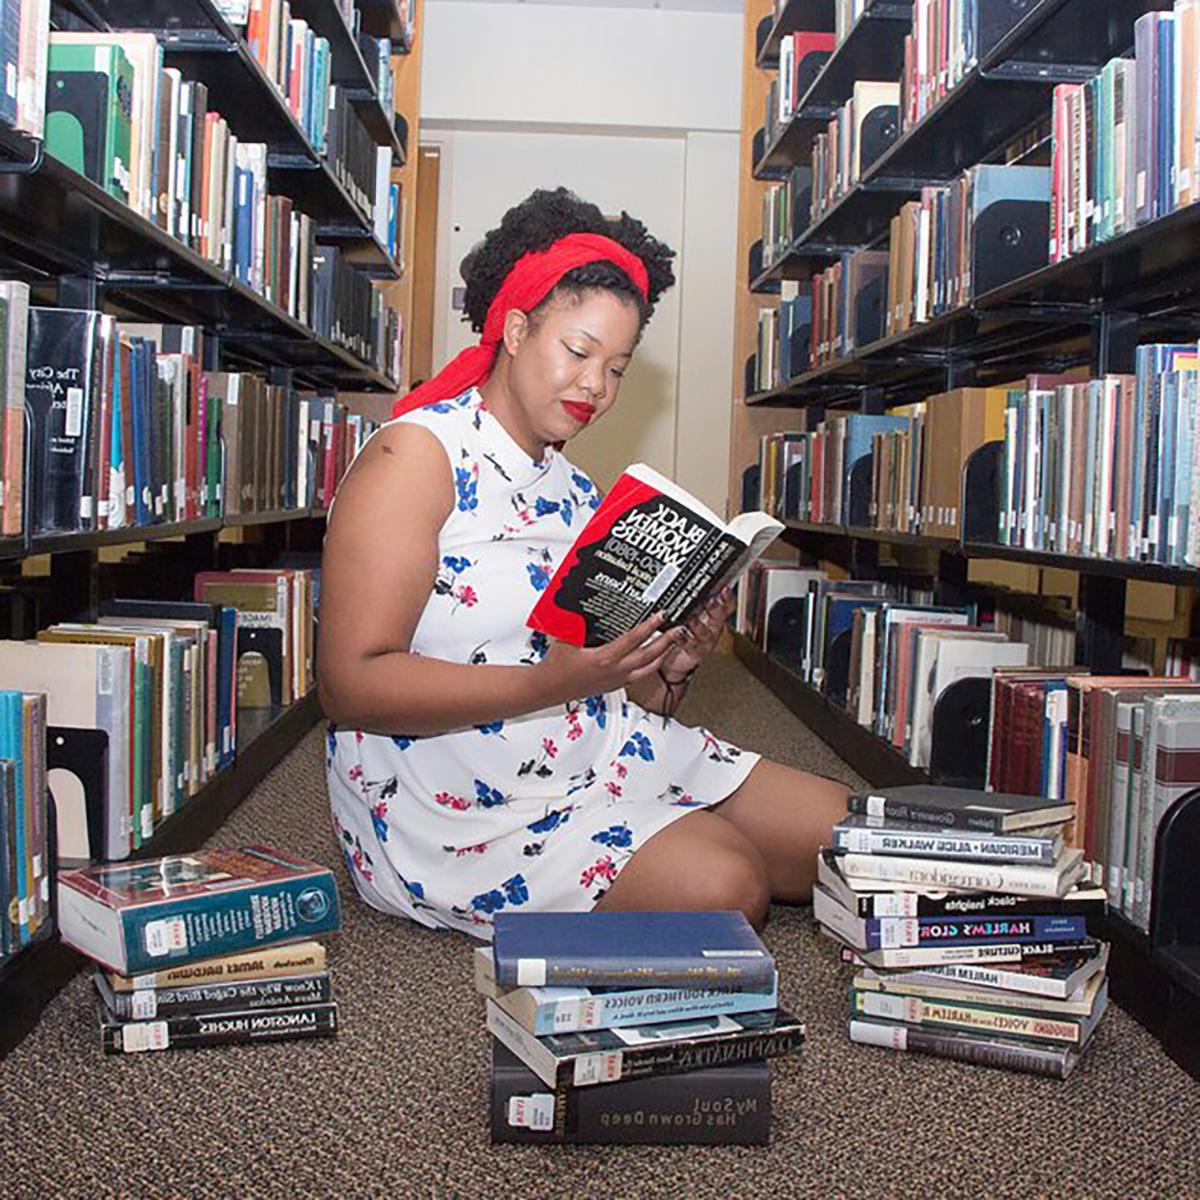 Photo of Caitlyn Hunter, a young Black woman, seated between two library bookshelves with a pile of books in front of her. She is reading a book titled "Black Women Writers, 1950-1980"